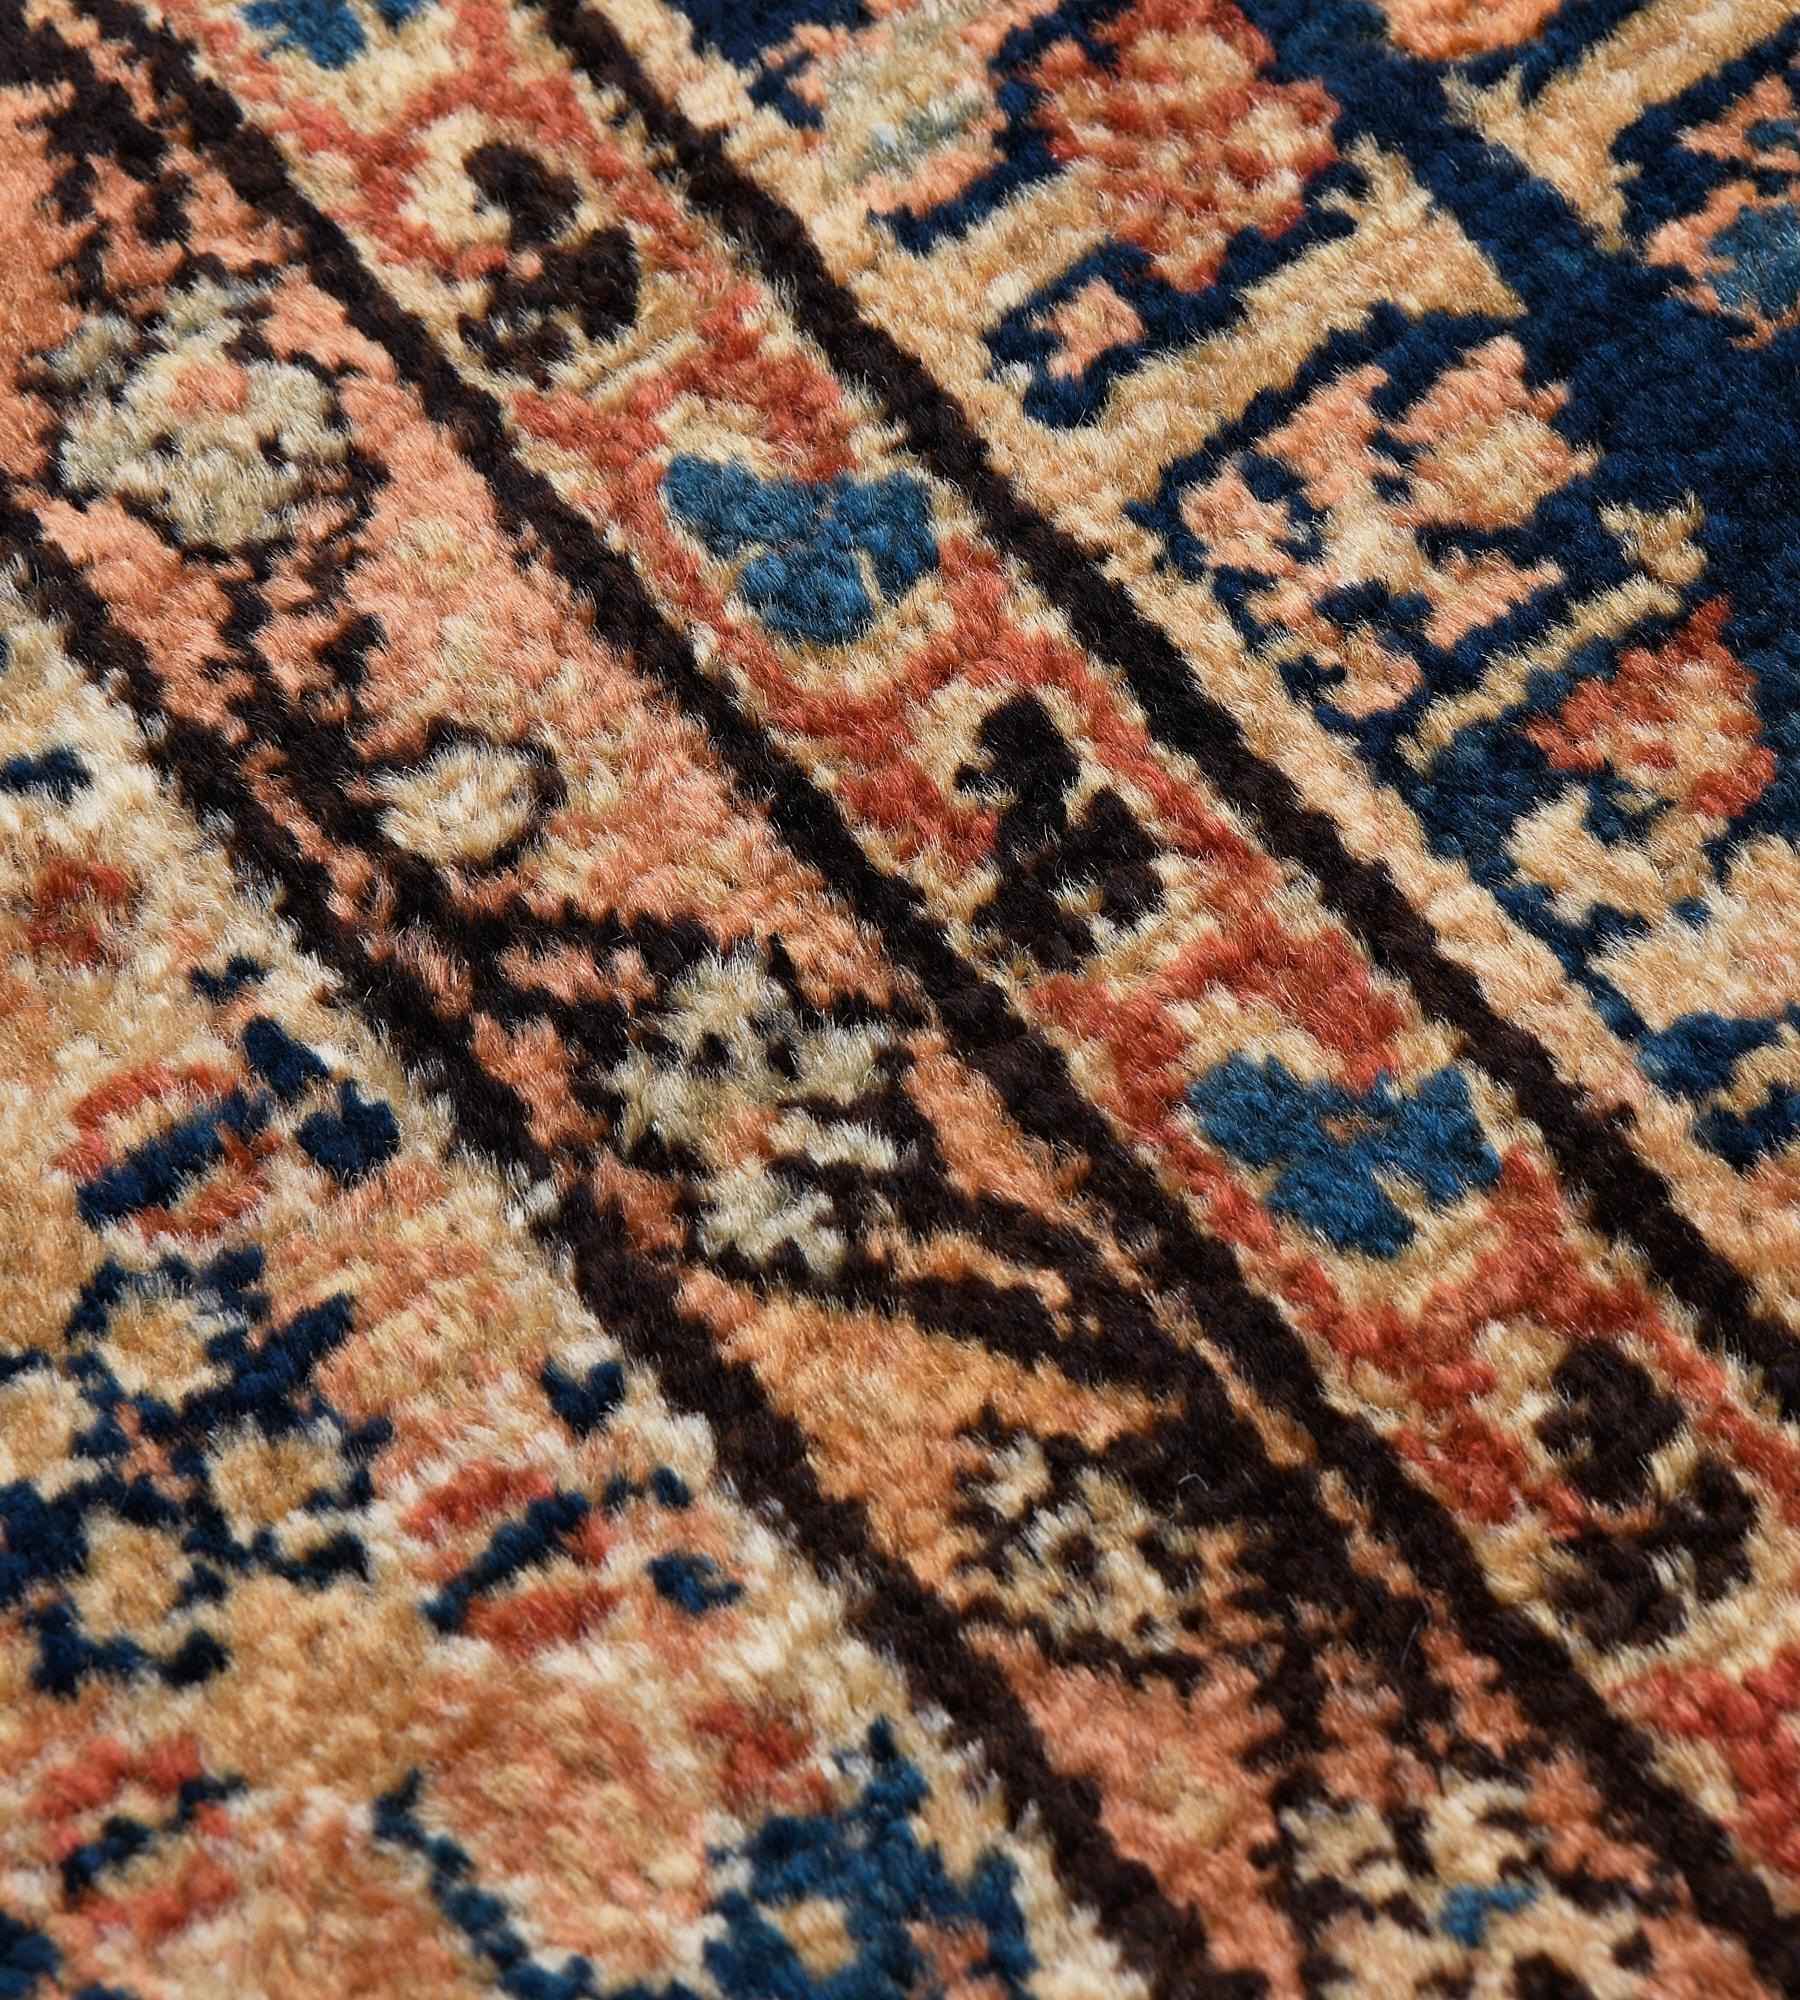 Handmade Antique Circa-1900 Persian Fereghan Rug In Good Condition For Sale In West Hollywood, CA